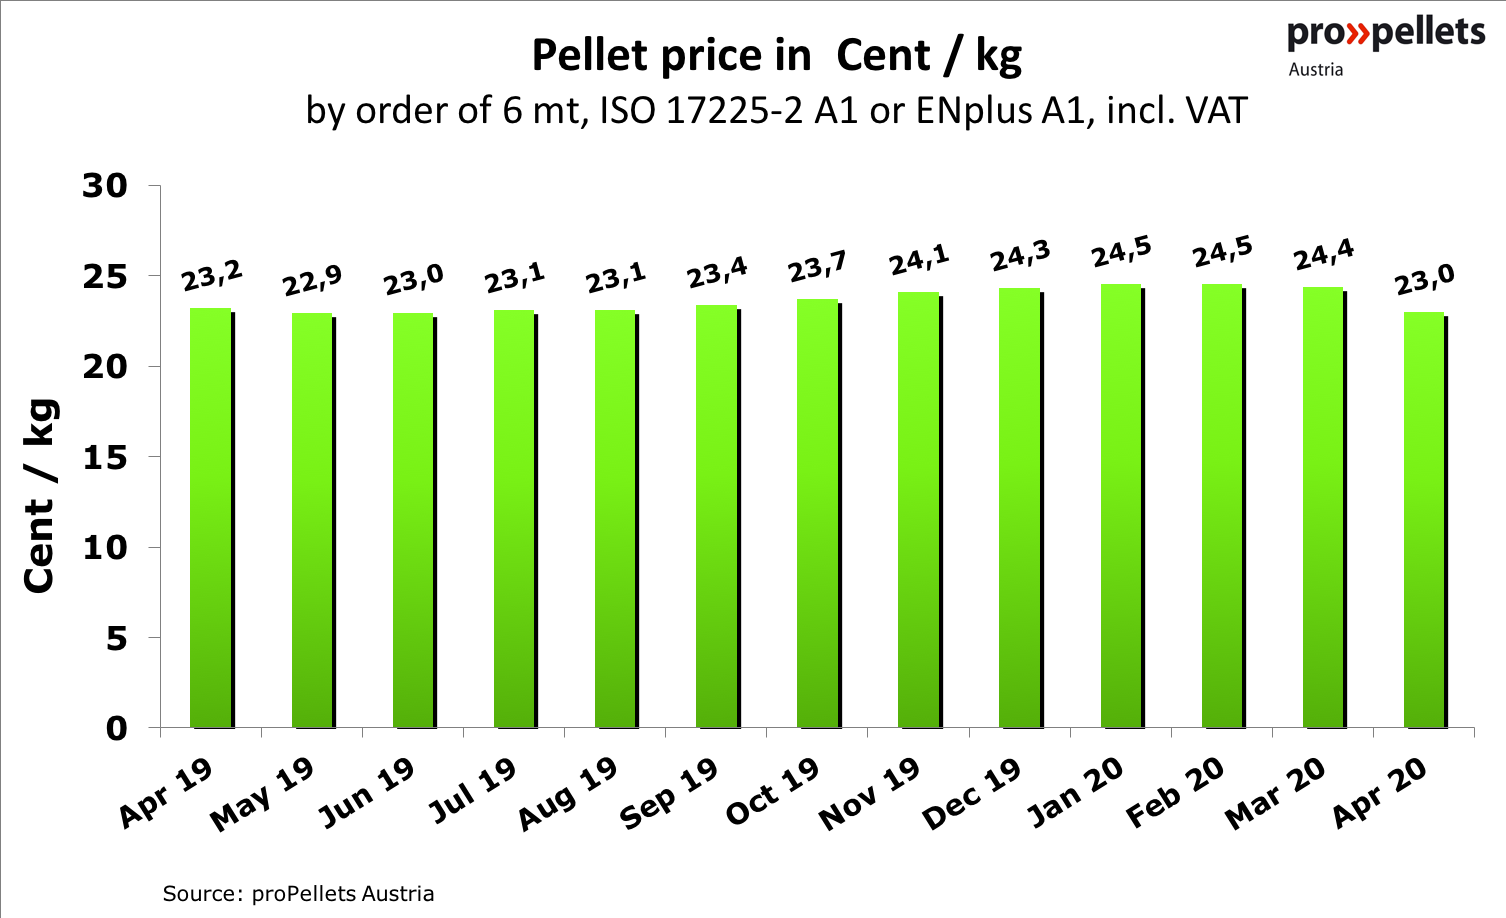 Wood pellet prices in Austria and comparisons to other fuels